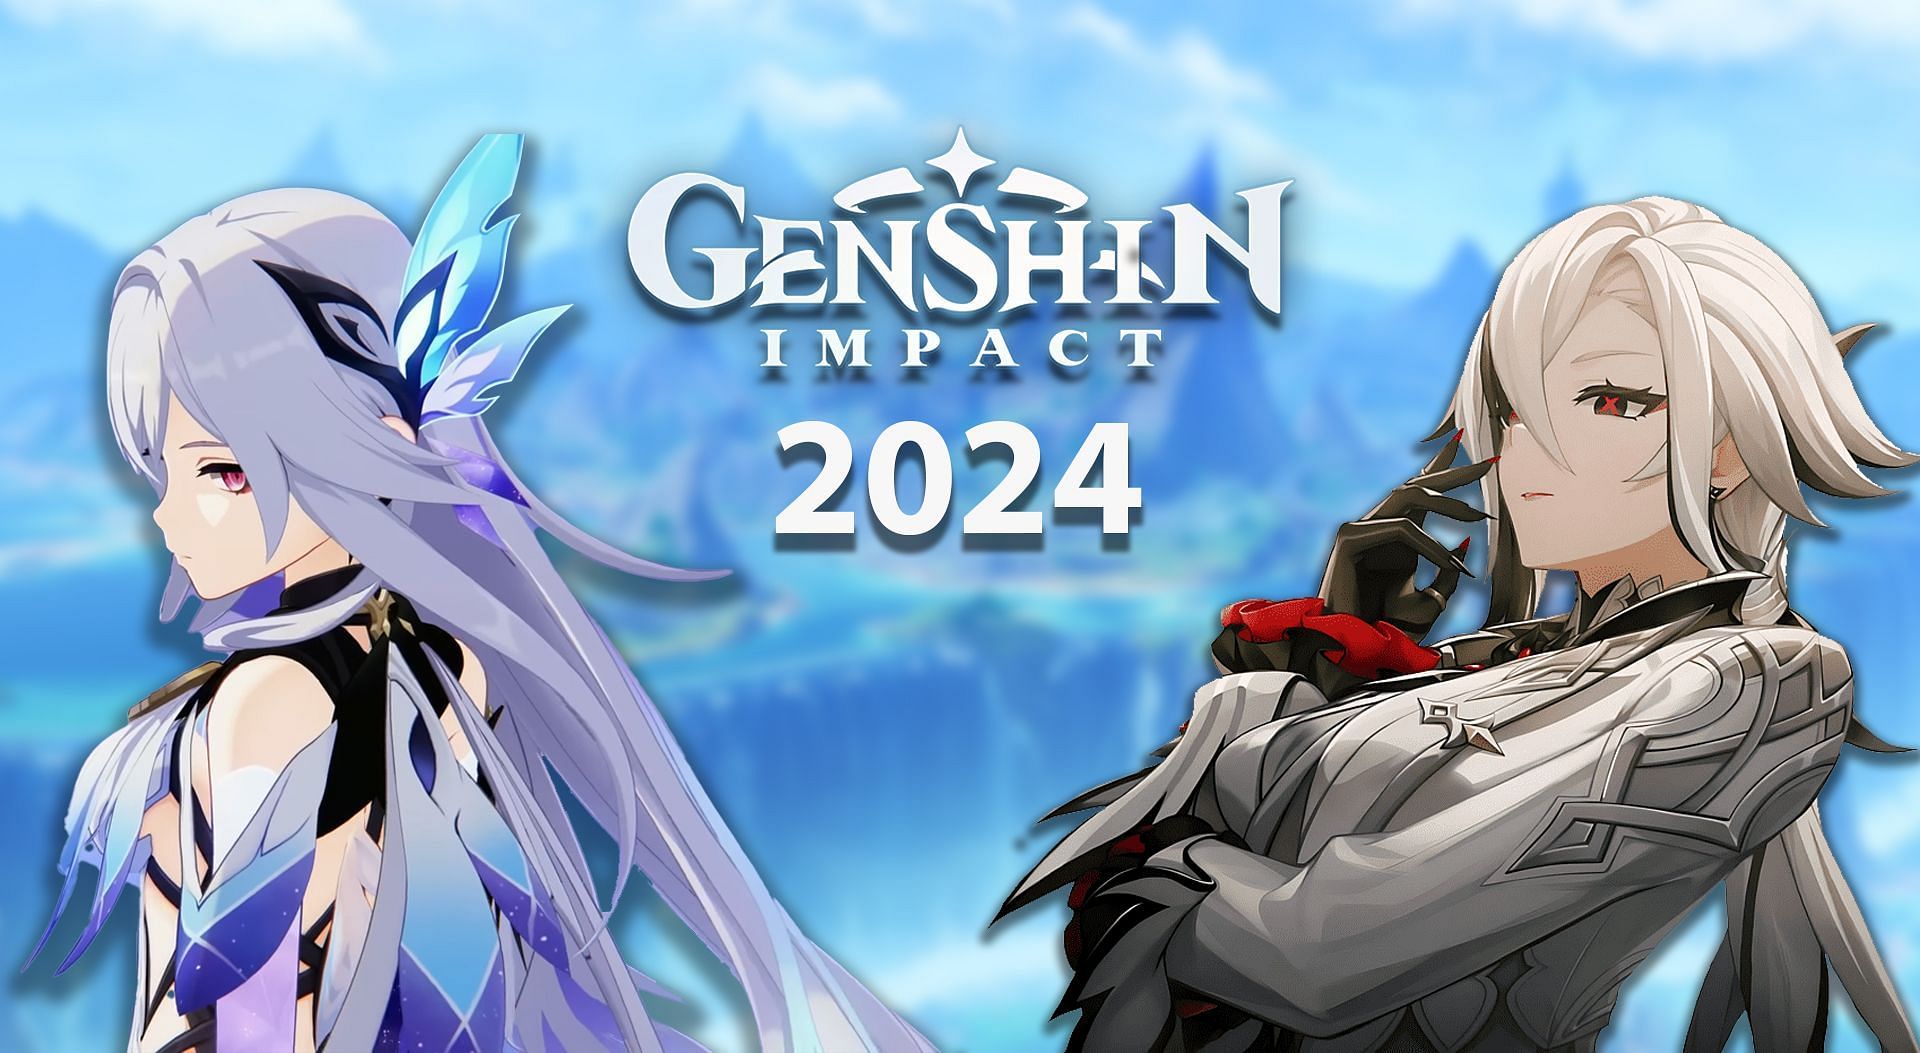 Genshin impact most anticipated characters